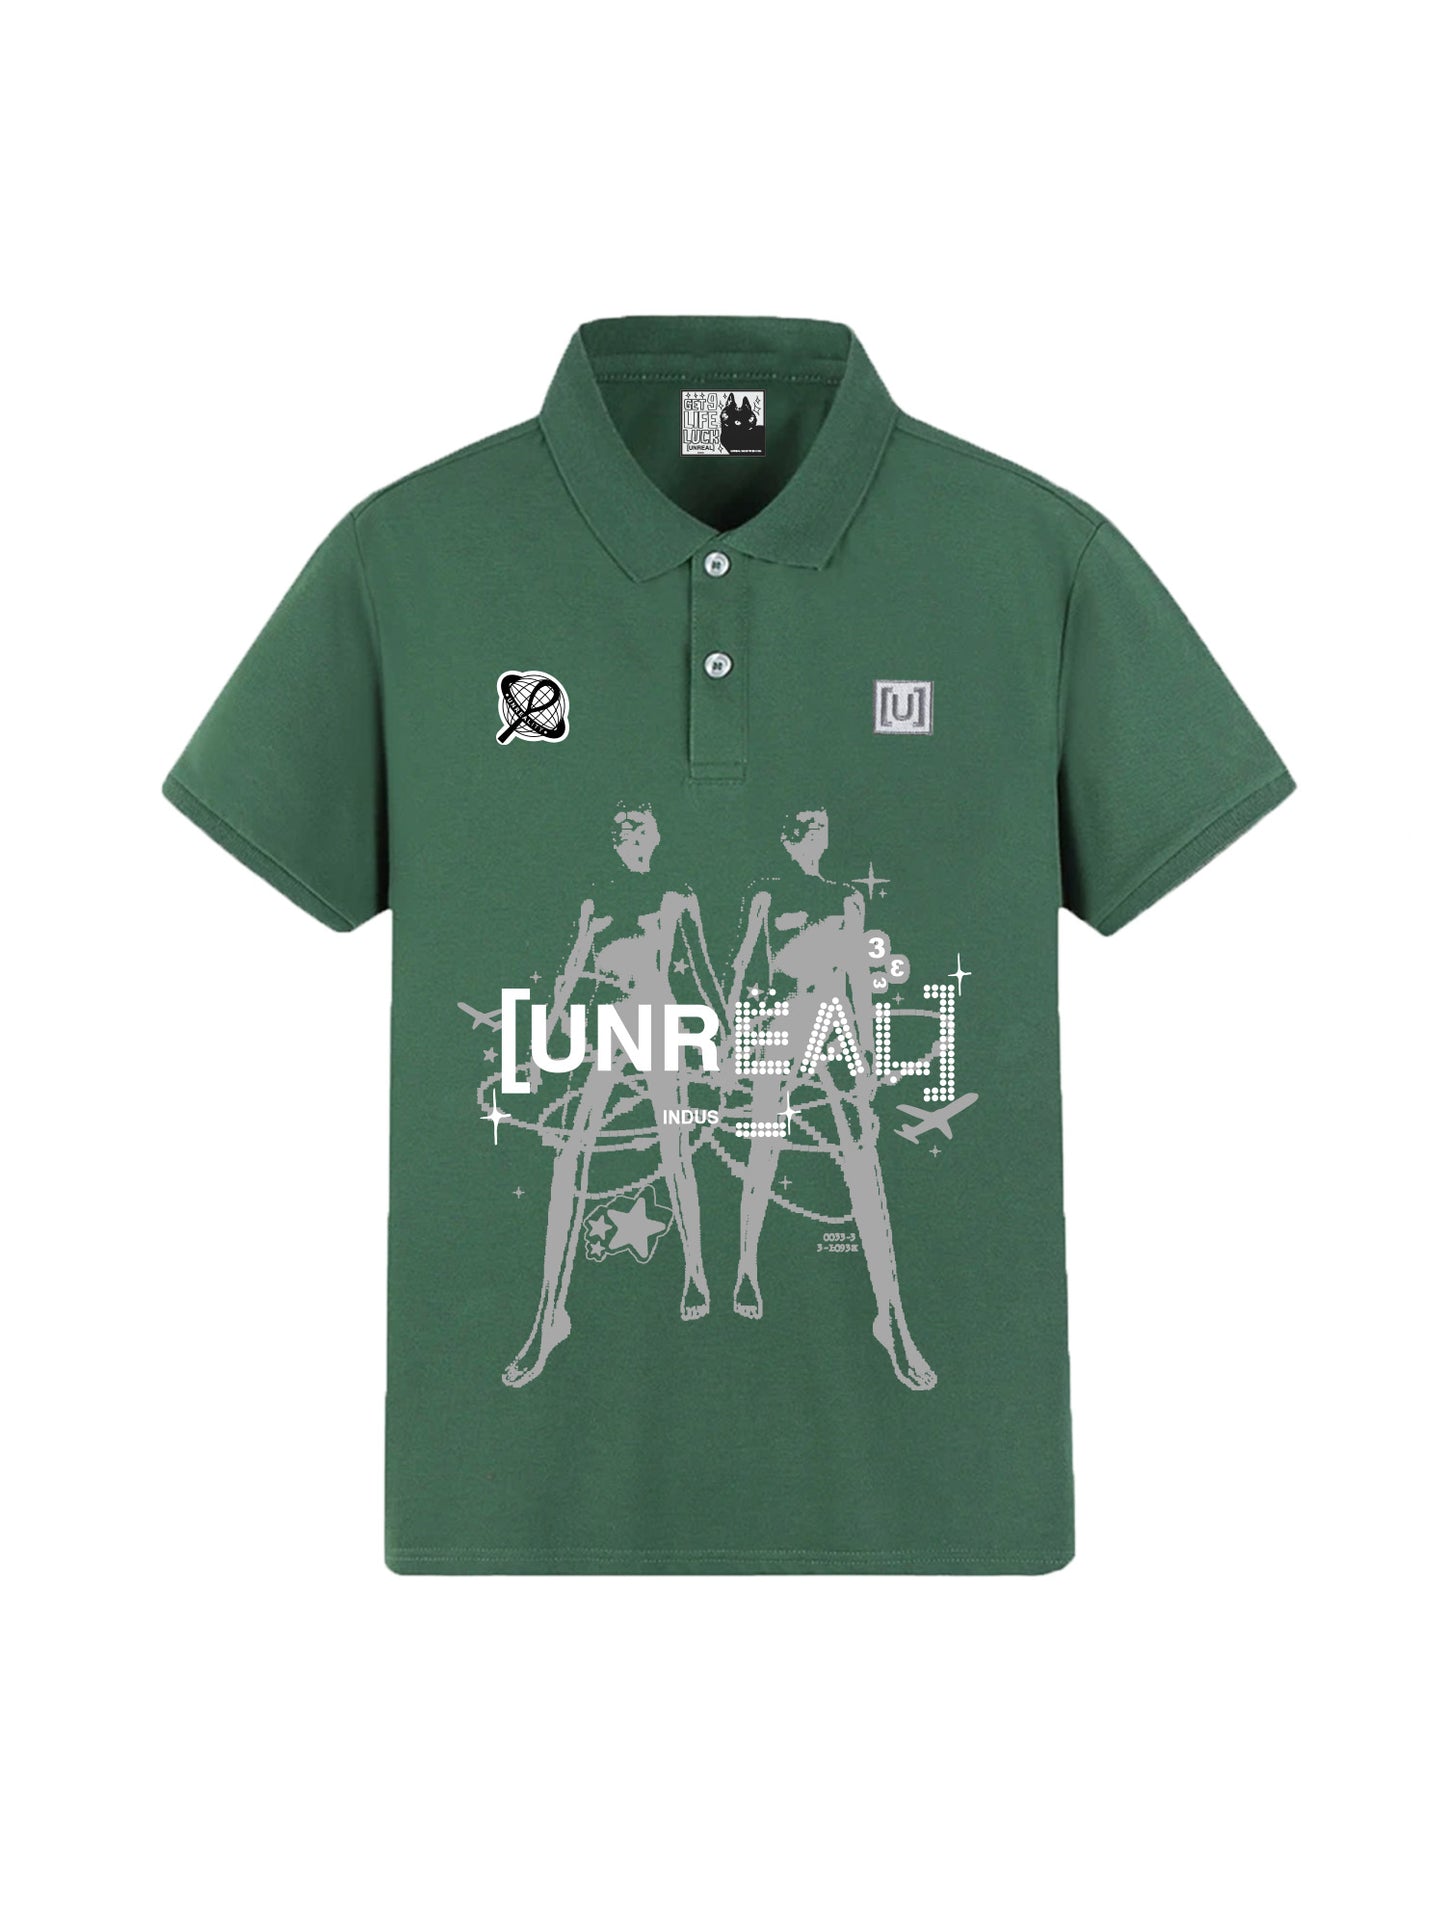 UNREAL Soccer Team  polo shirt in green colorway - high quality streetwear - [UNREAL]industries